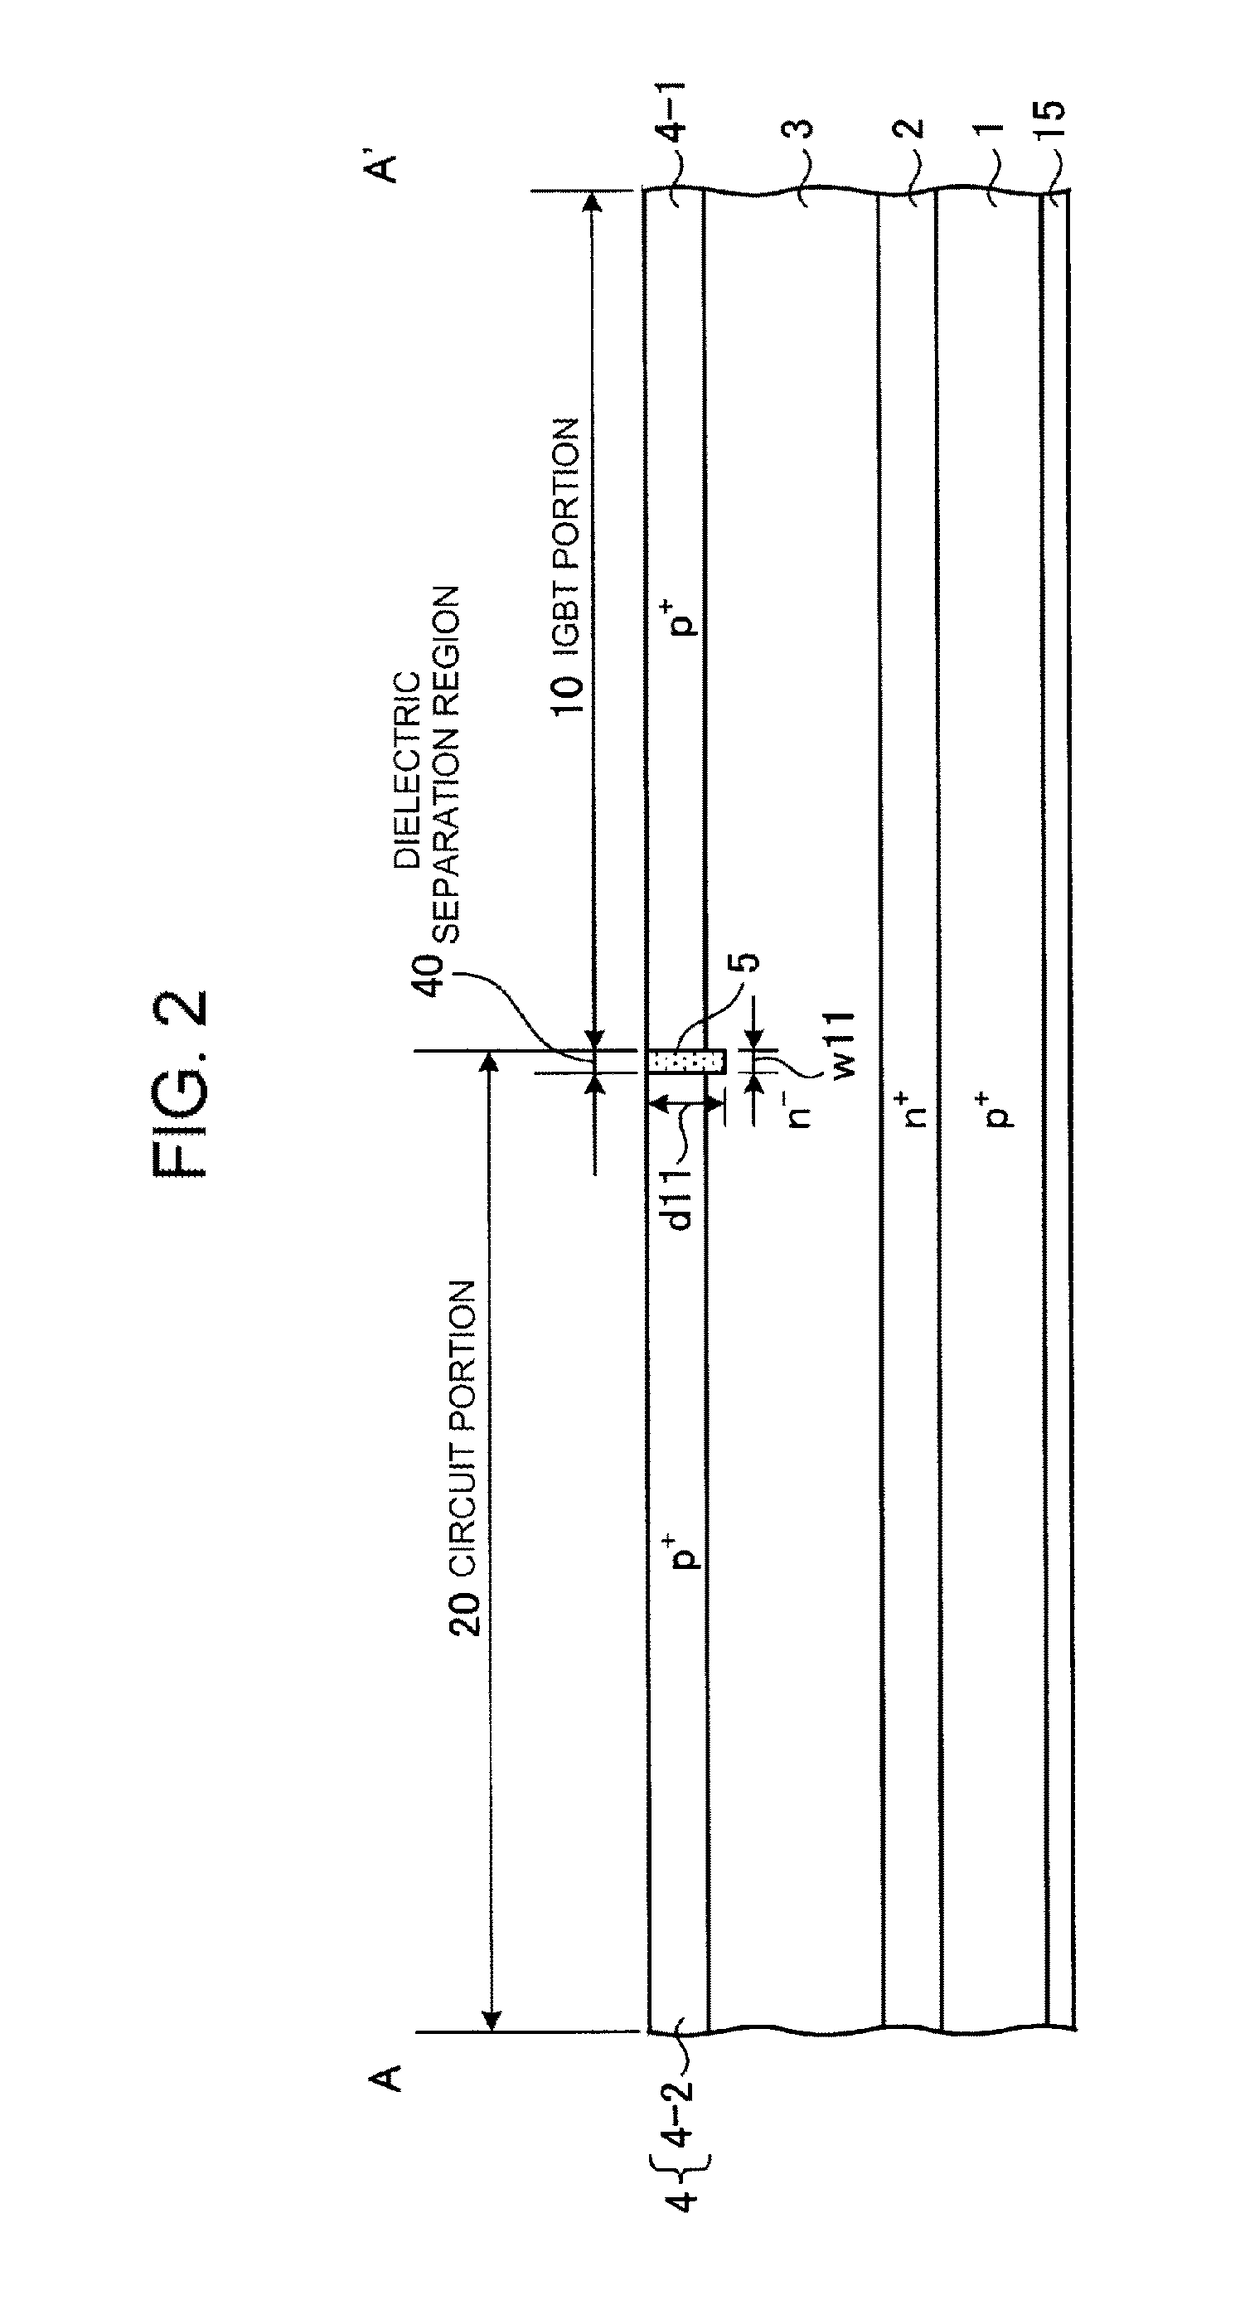 Semiconductor device including an insulated gate bipolar transistor and a circuit configured to control the insulated gate bipolar transistor provided on the same semiconductor substrate